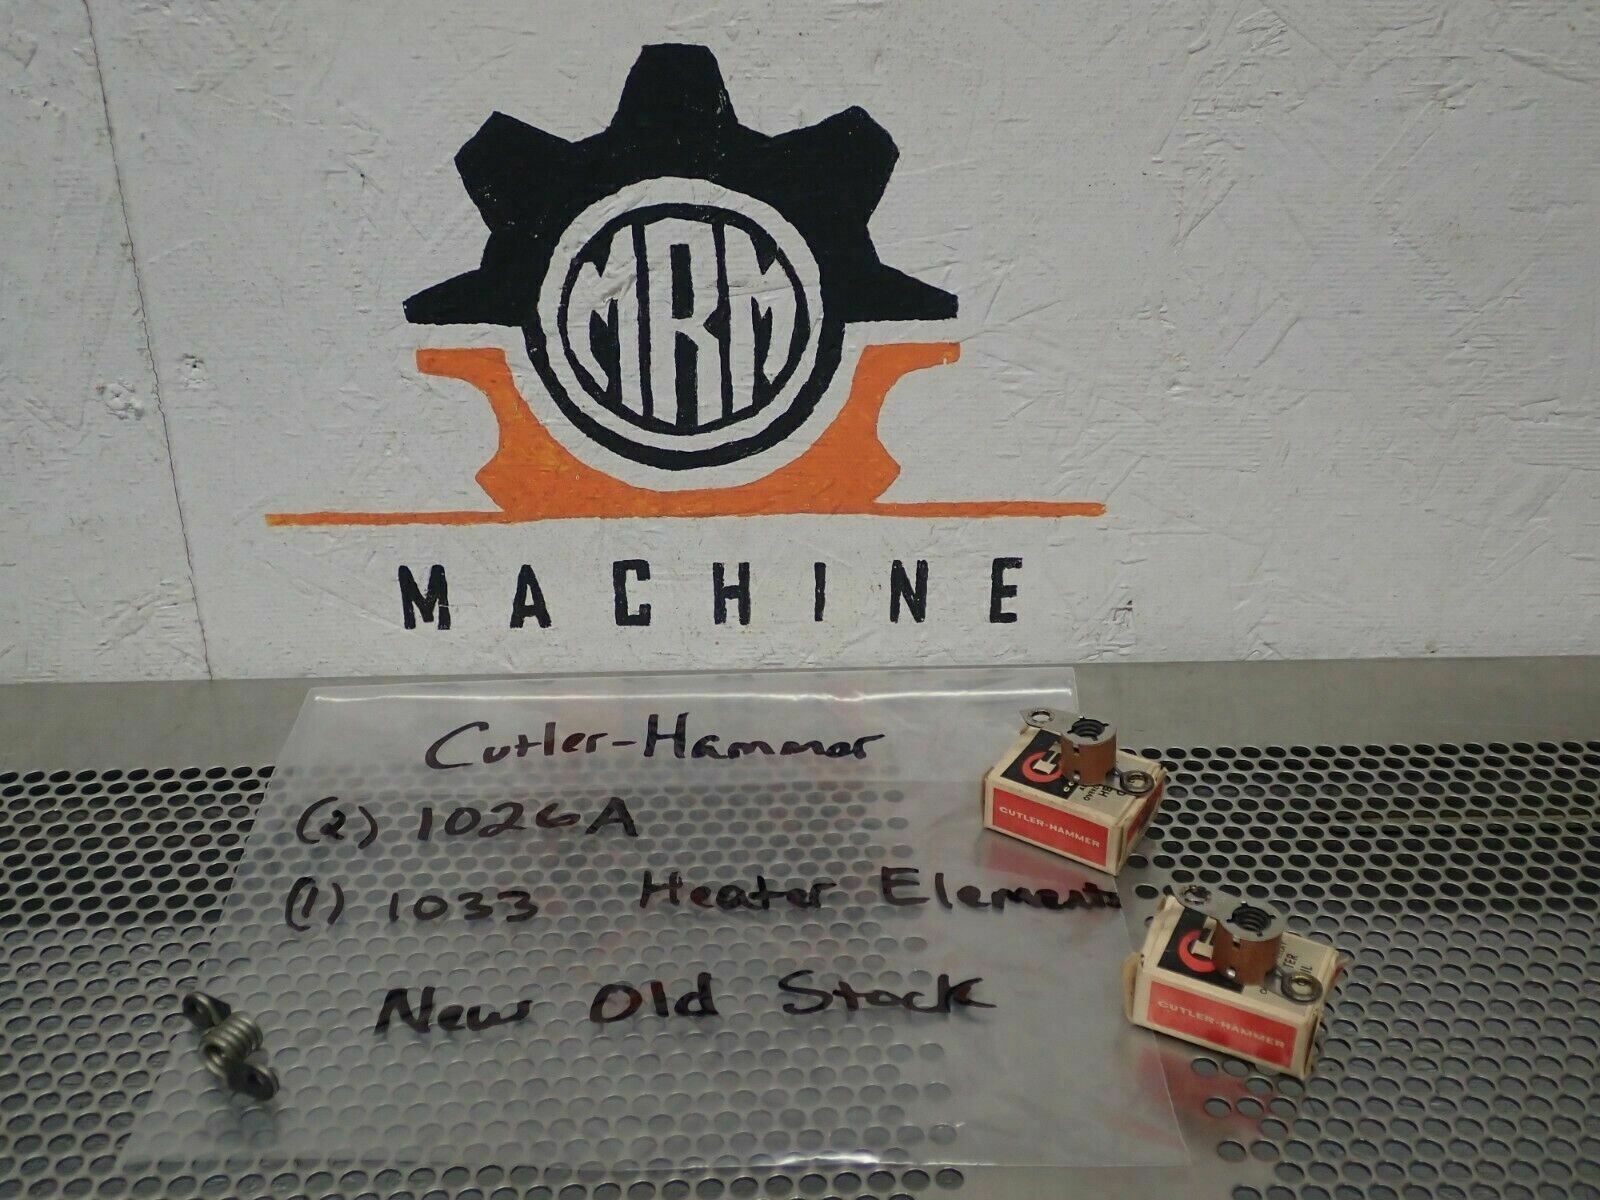 Cutler-hammer (2) 1026a & (1) 1033 Heater Elements New Old Stock